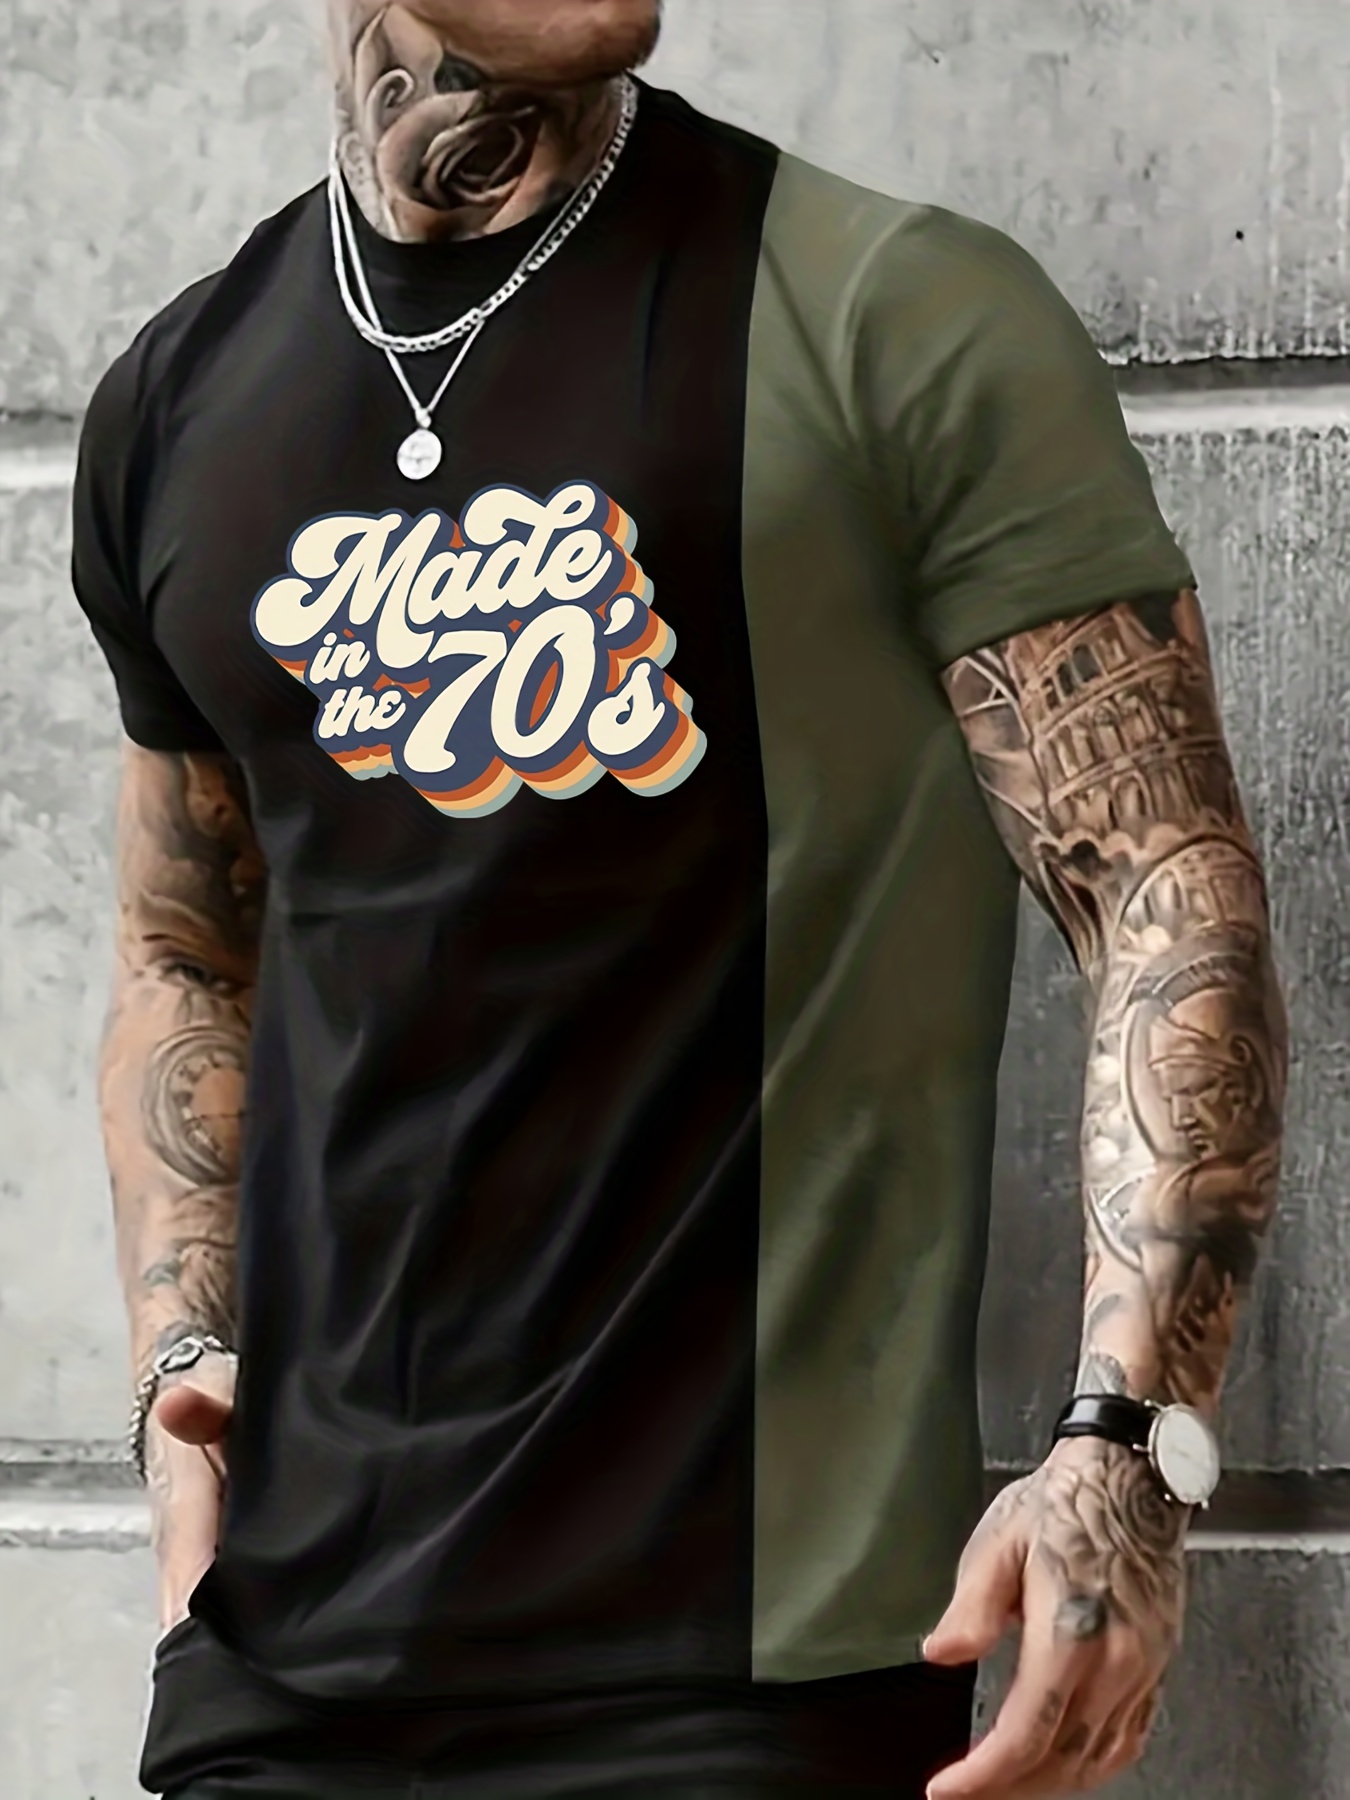 made In 70's Trendy T-shirt For Men, Plus Size Comfy Summer